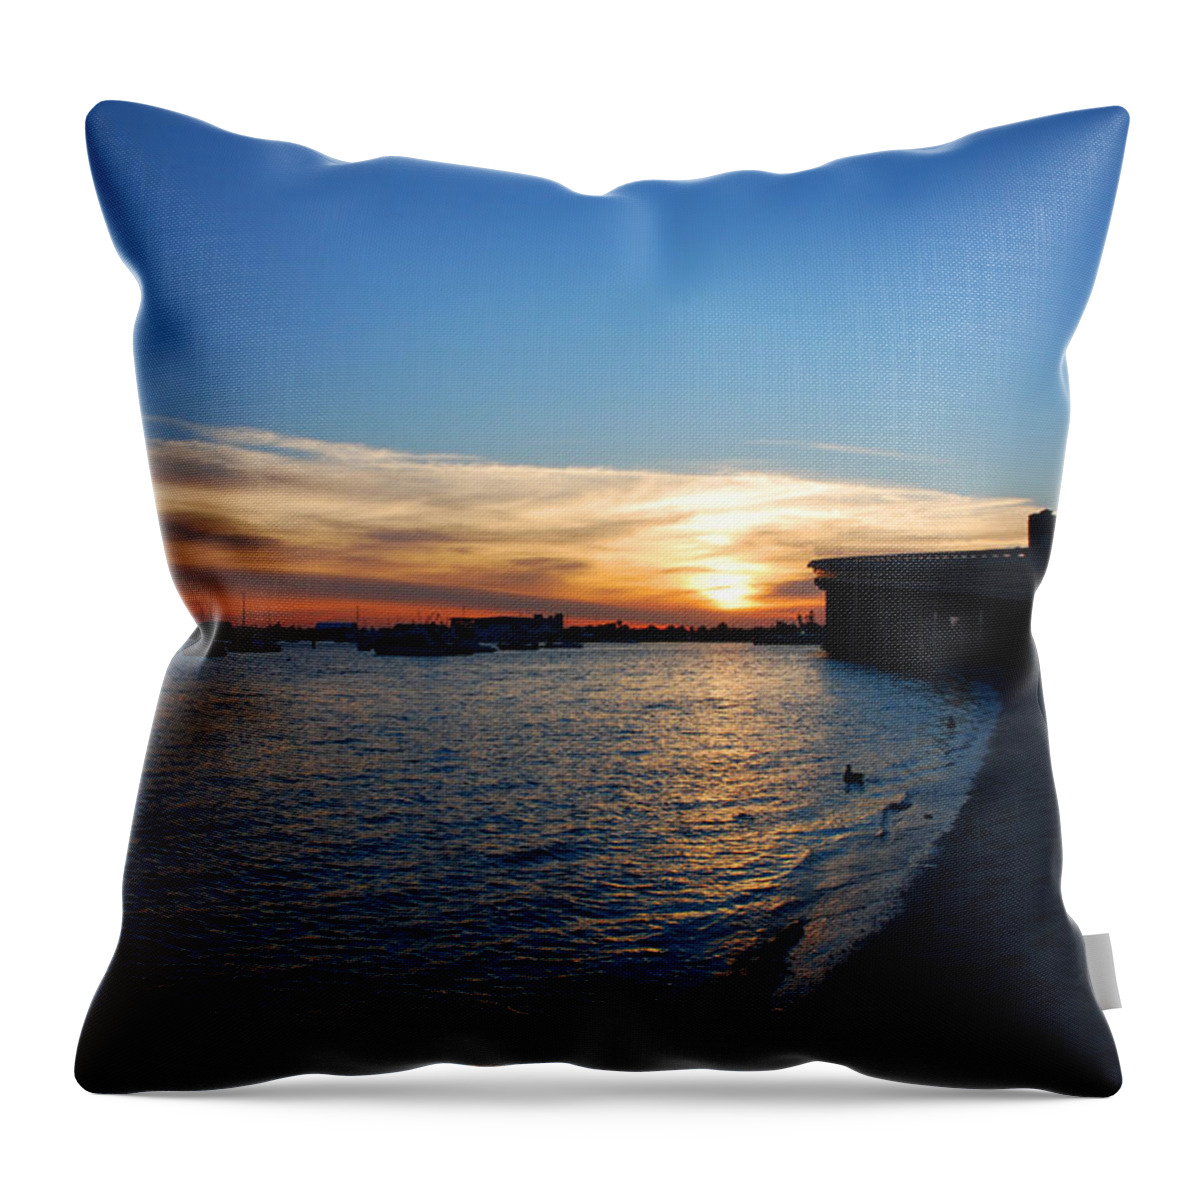  Throw Pillow featuring the photograph 2- Sunset In Paradise by Joseph Keane